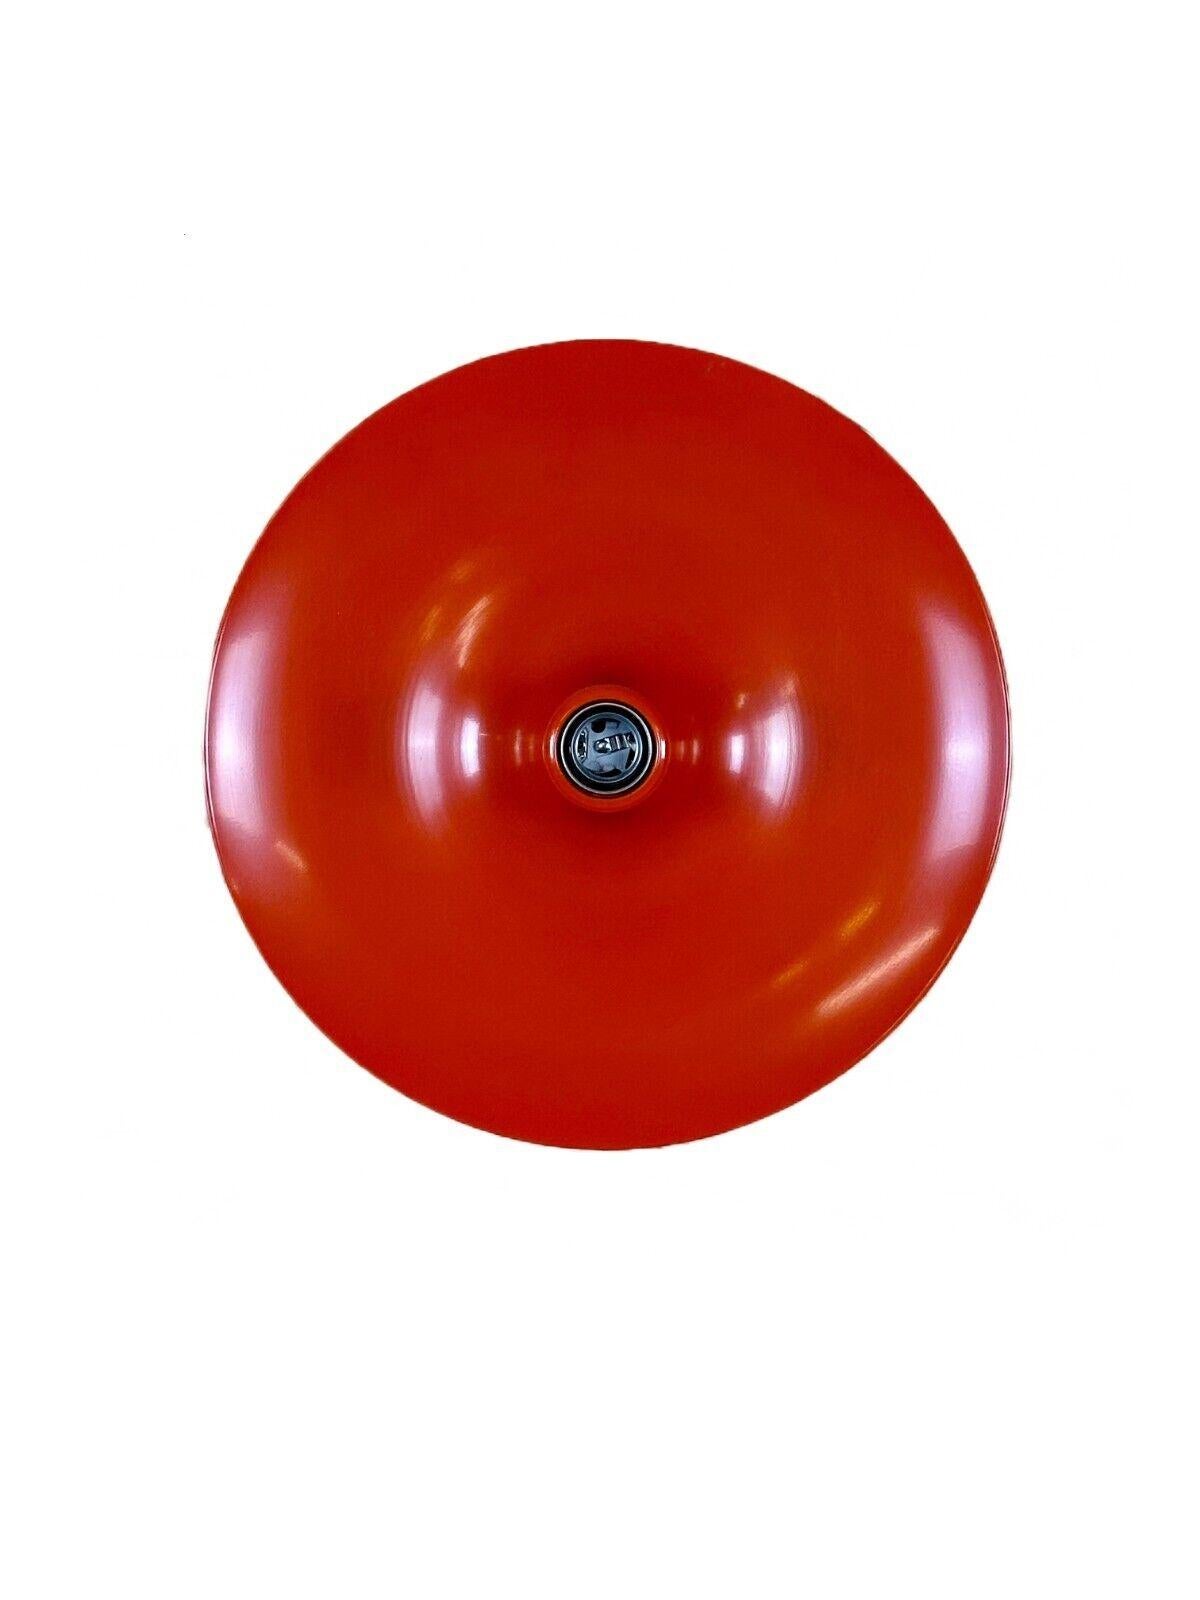 60s 70s discus wall lamp Teka Orange Space Age design aluminum metal

Object: wall lamp

Manufacturer: Teka

Condition: good - vintage

Age: around 1960-1970

Dimensions:

Diameter = 35cm
Height = 9cm

Other notes:

E27 socket

The pictures serve as